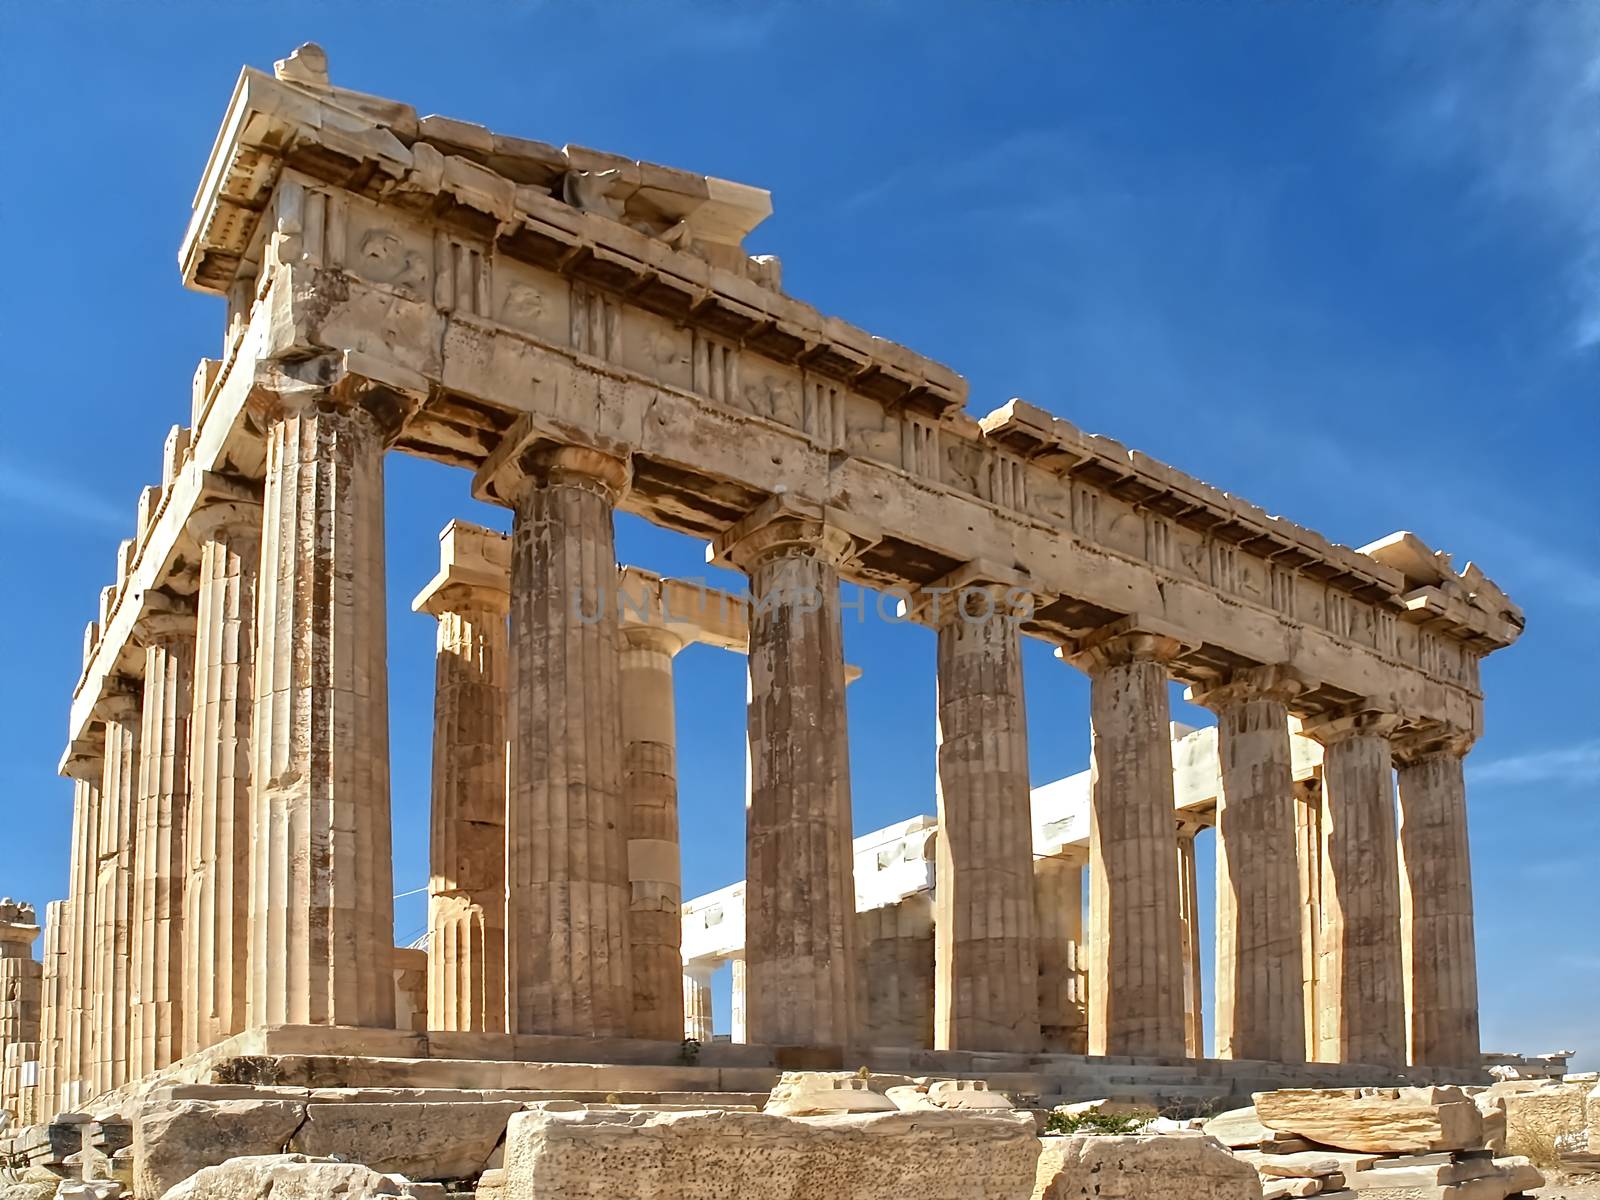 Temple of the famous Acropolis in Athens in Greece